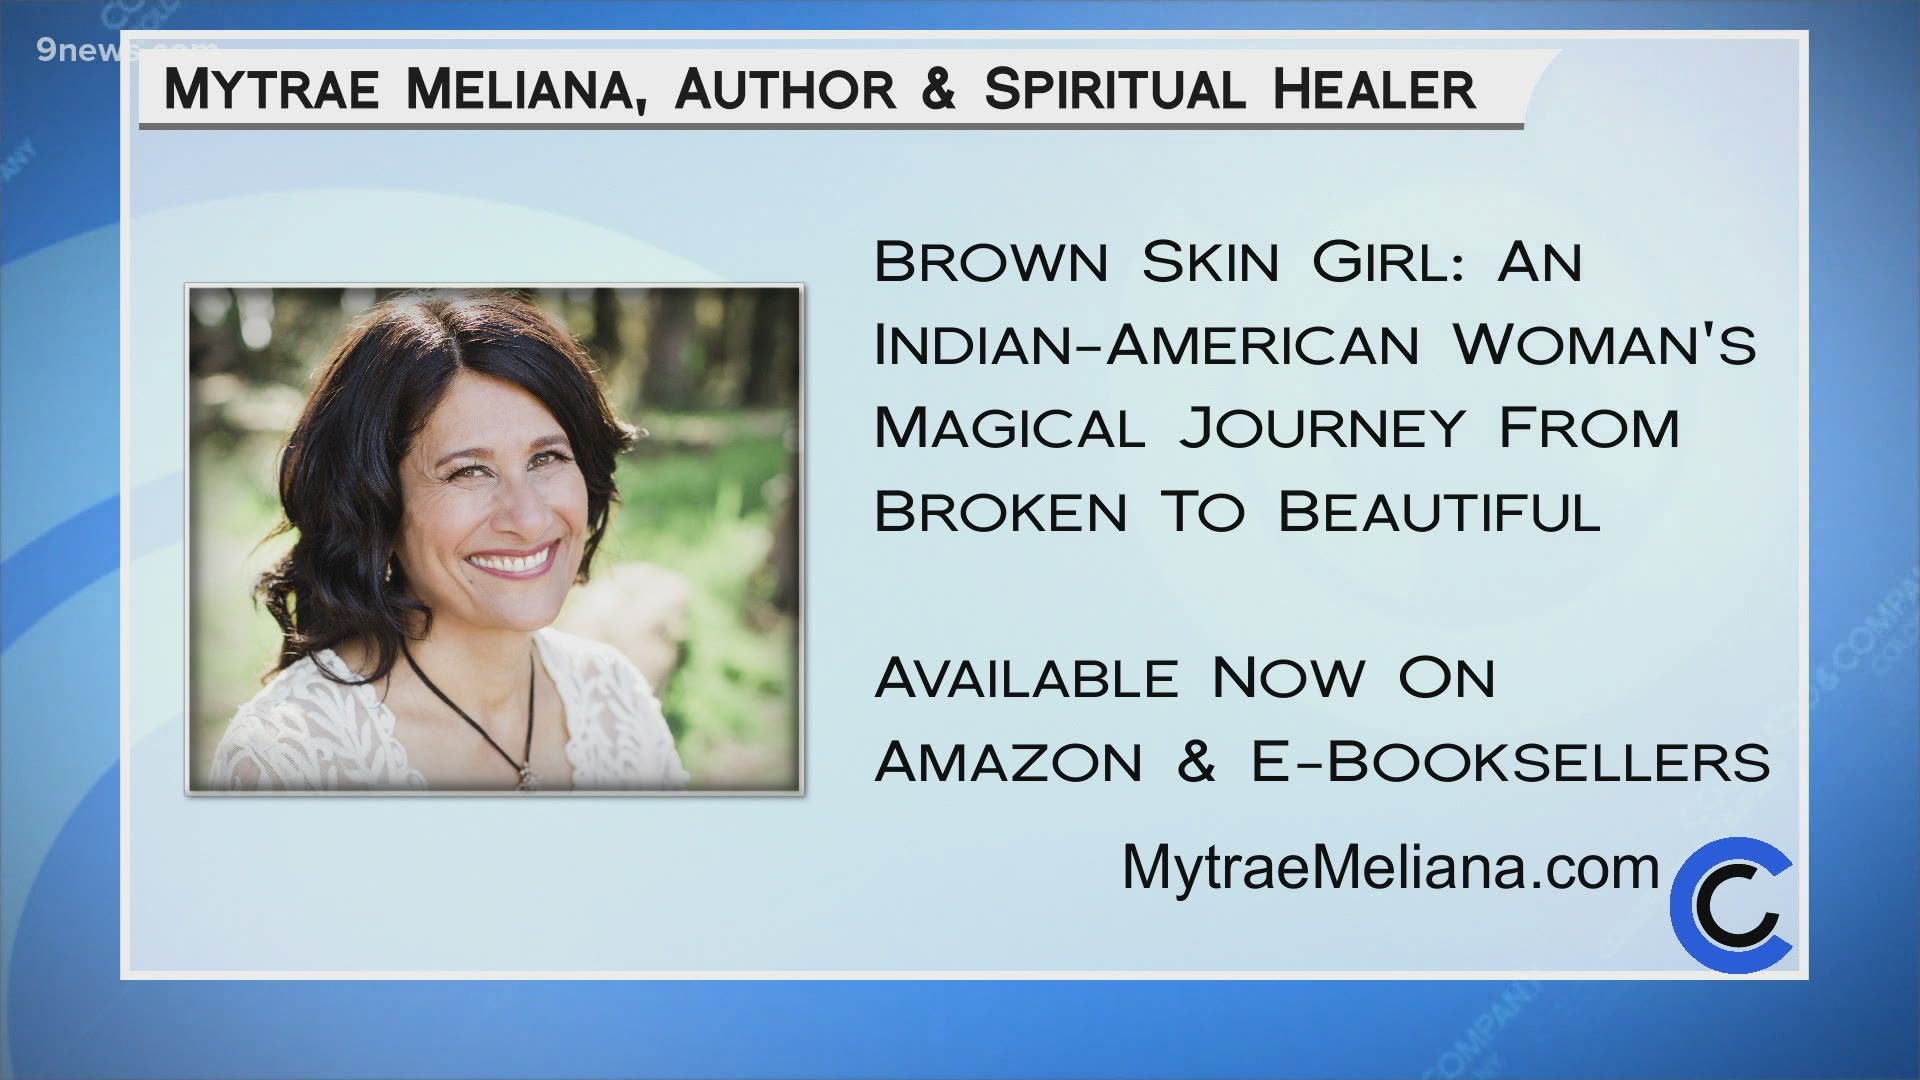 Get your copy of Brown Skin Girl: An Indian-American Woman's Magical Journey from Broken to Beautiful at Amazon and other book e-tailers and visit MytraeMeliana.com.